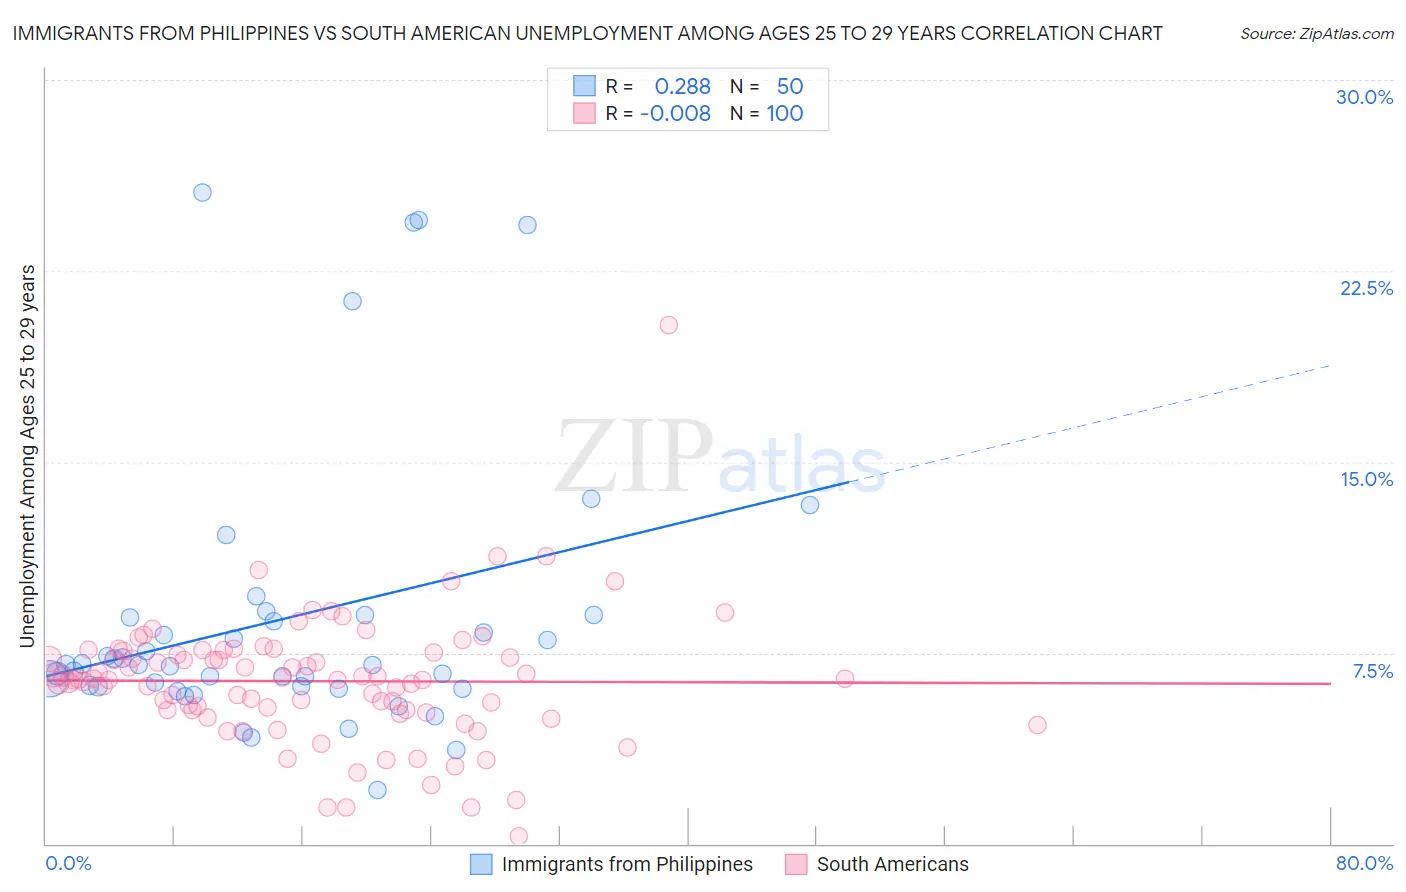 Immigrants from Philippines vs South American Unemployment Among Ages 25 to 29 years